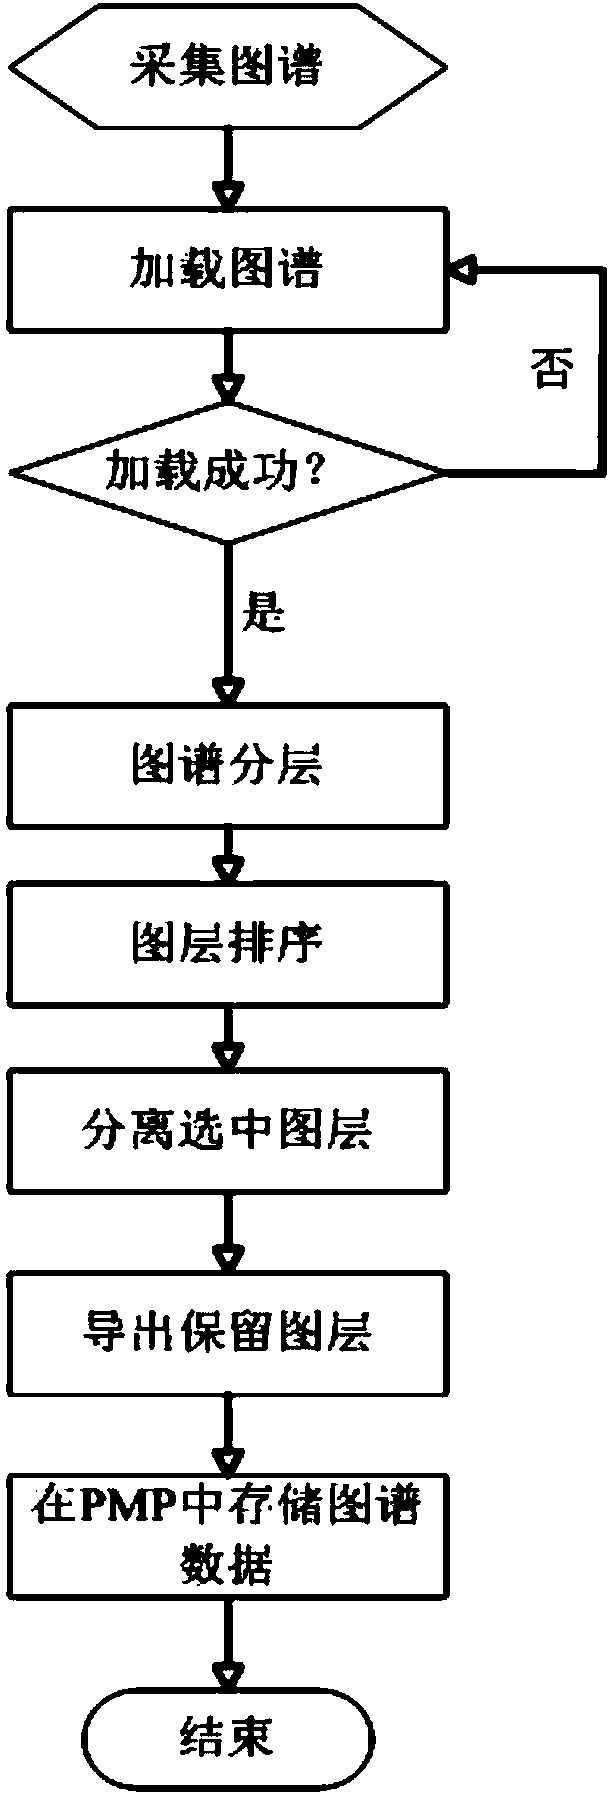 PMP terminal with uniform infrared data collection interface and infrared data collection method